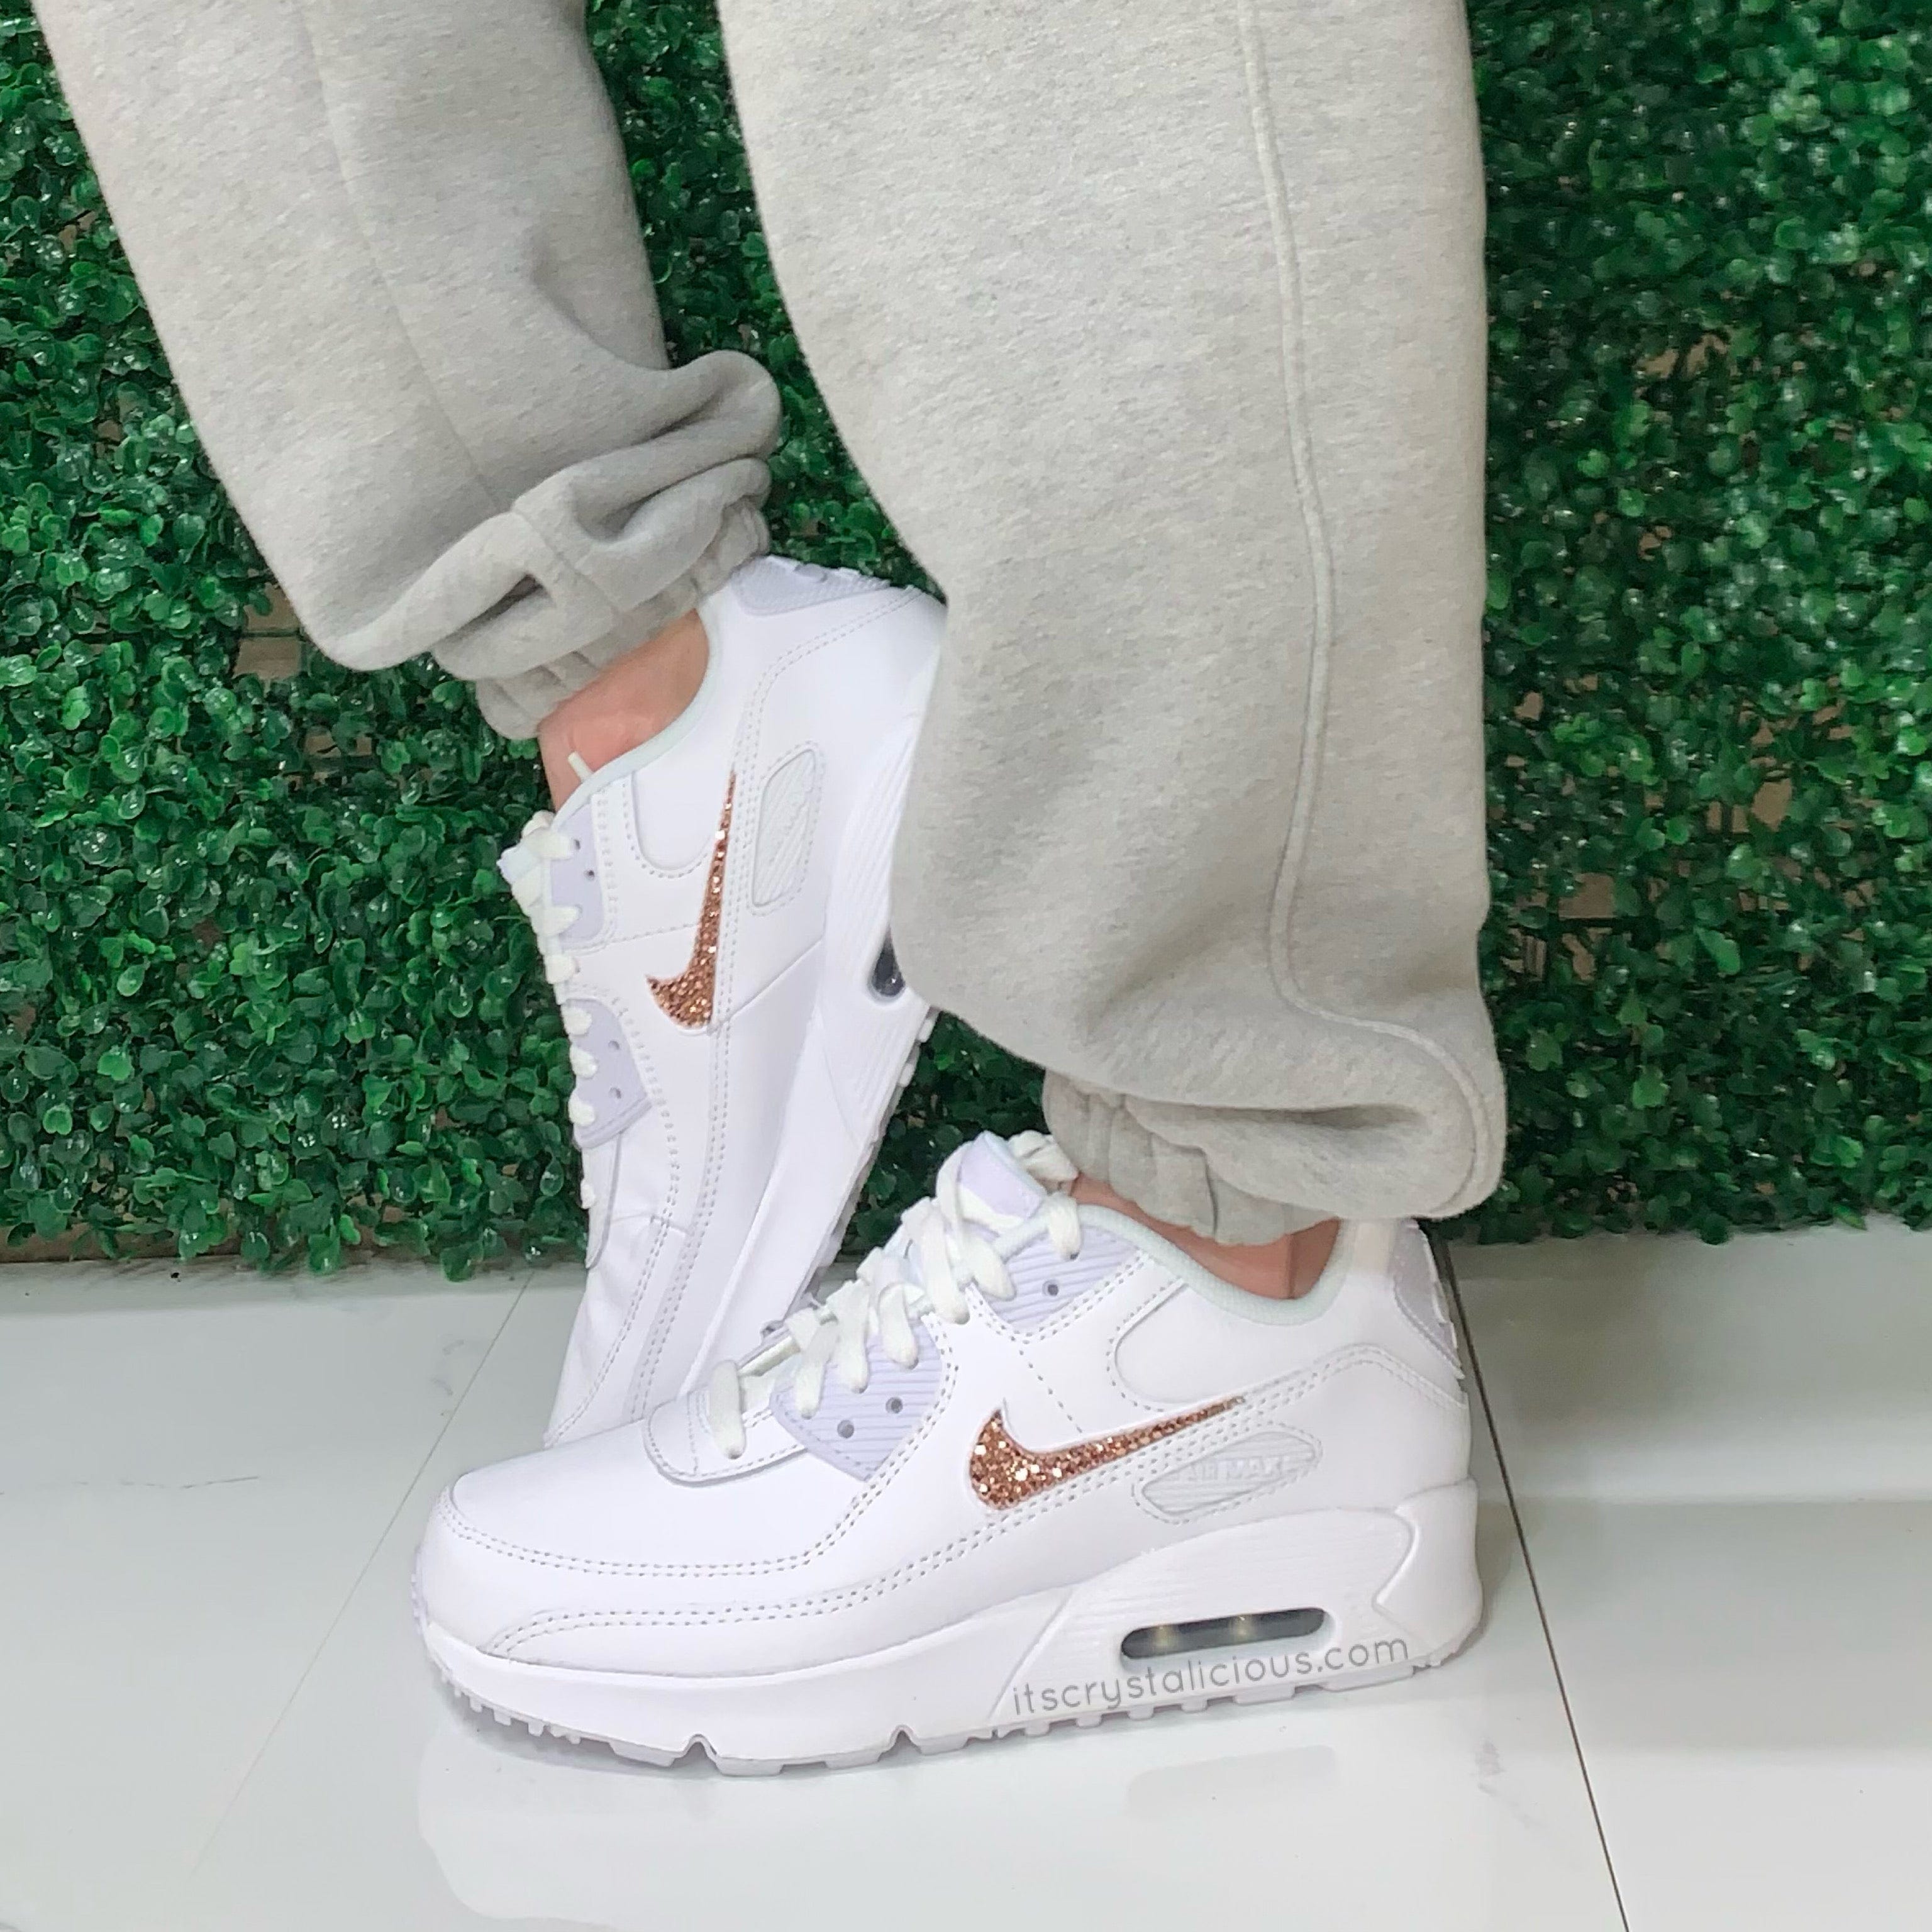 Nike Air Max - White/Rose Gold *– It's